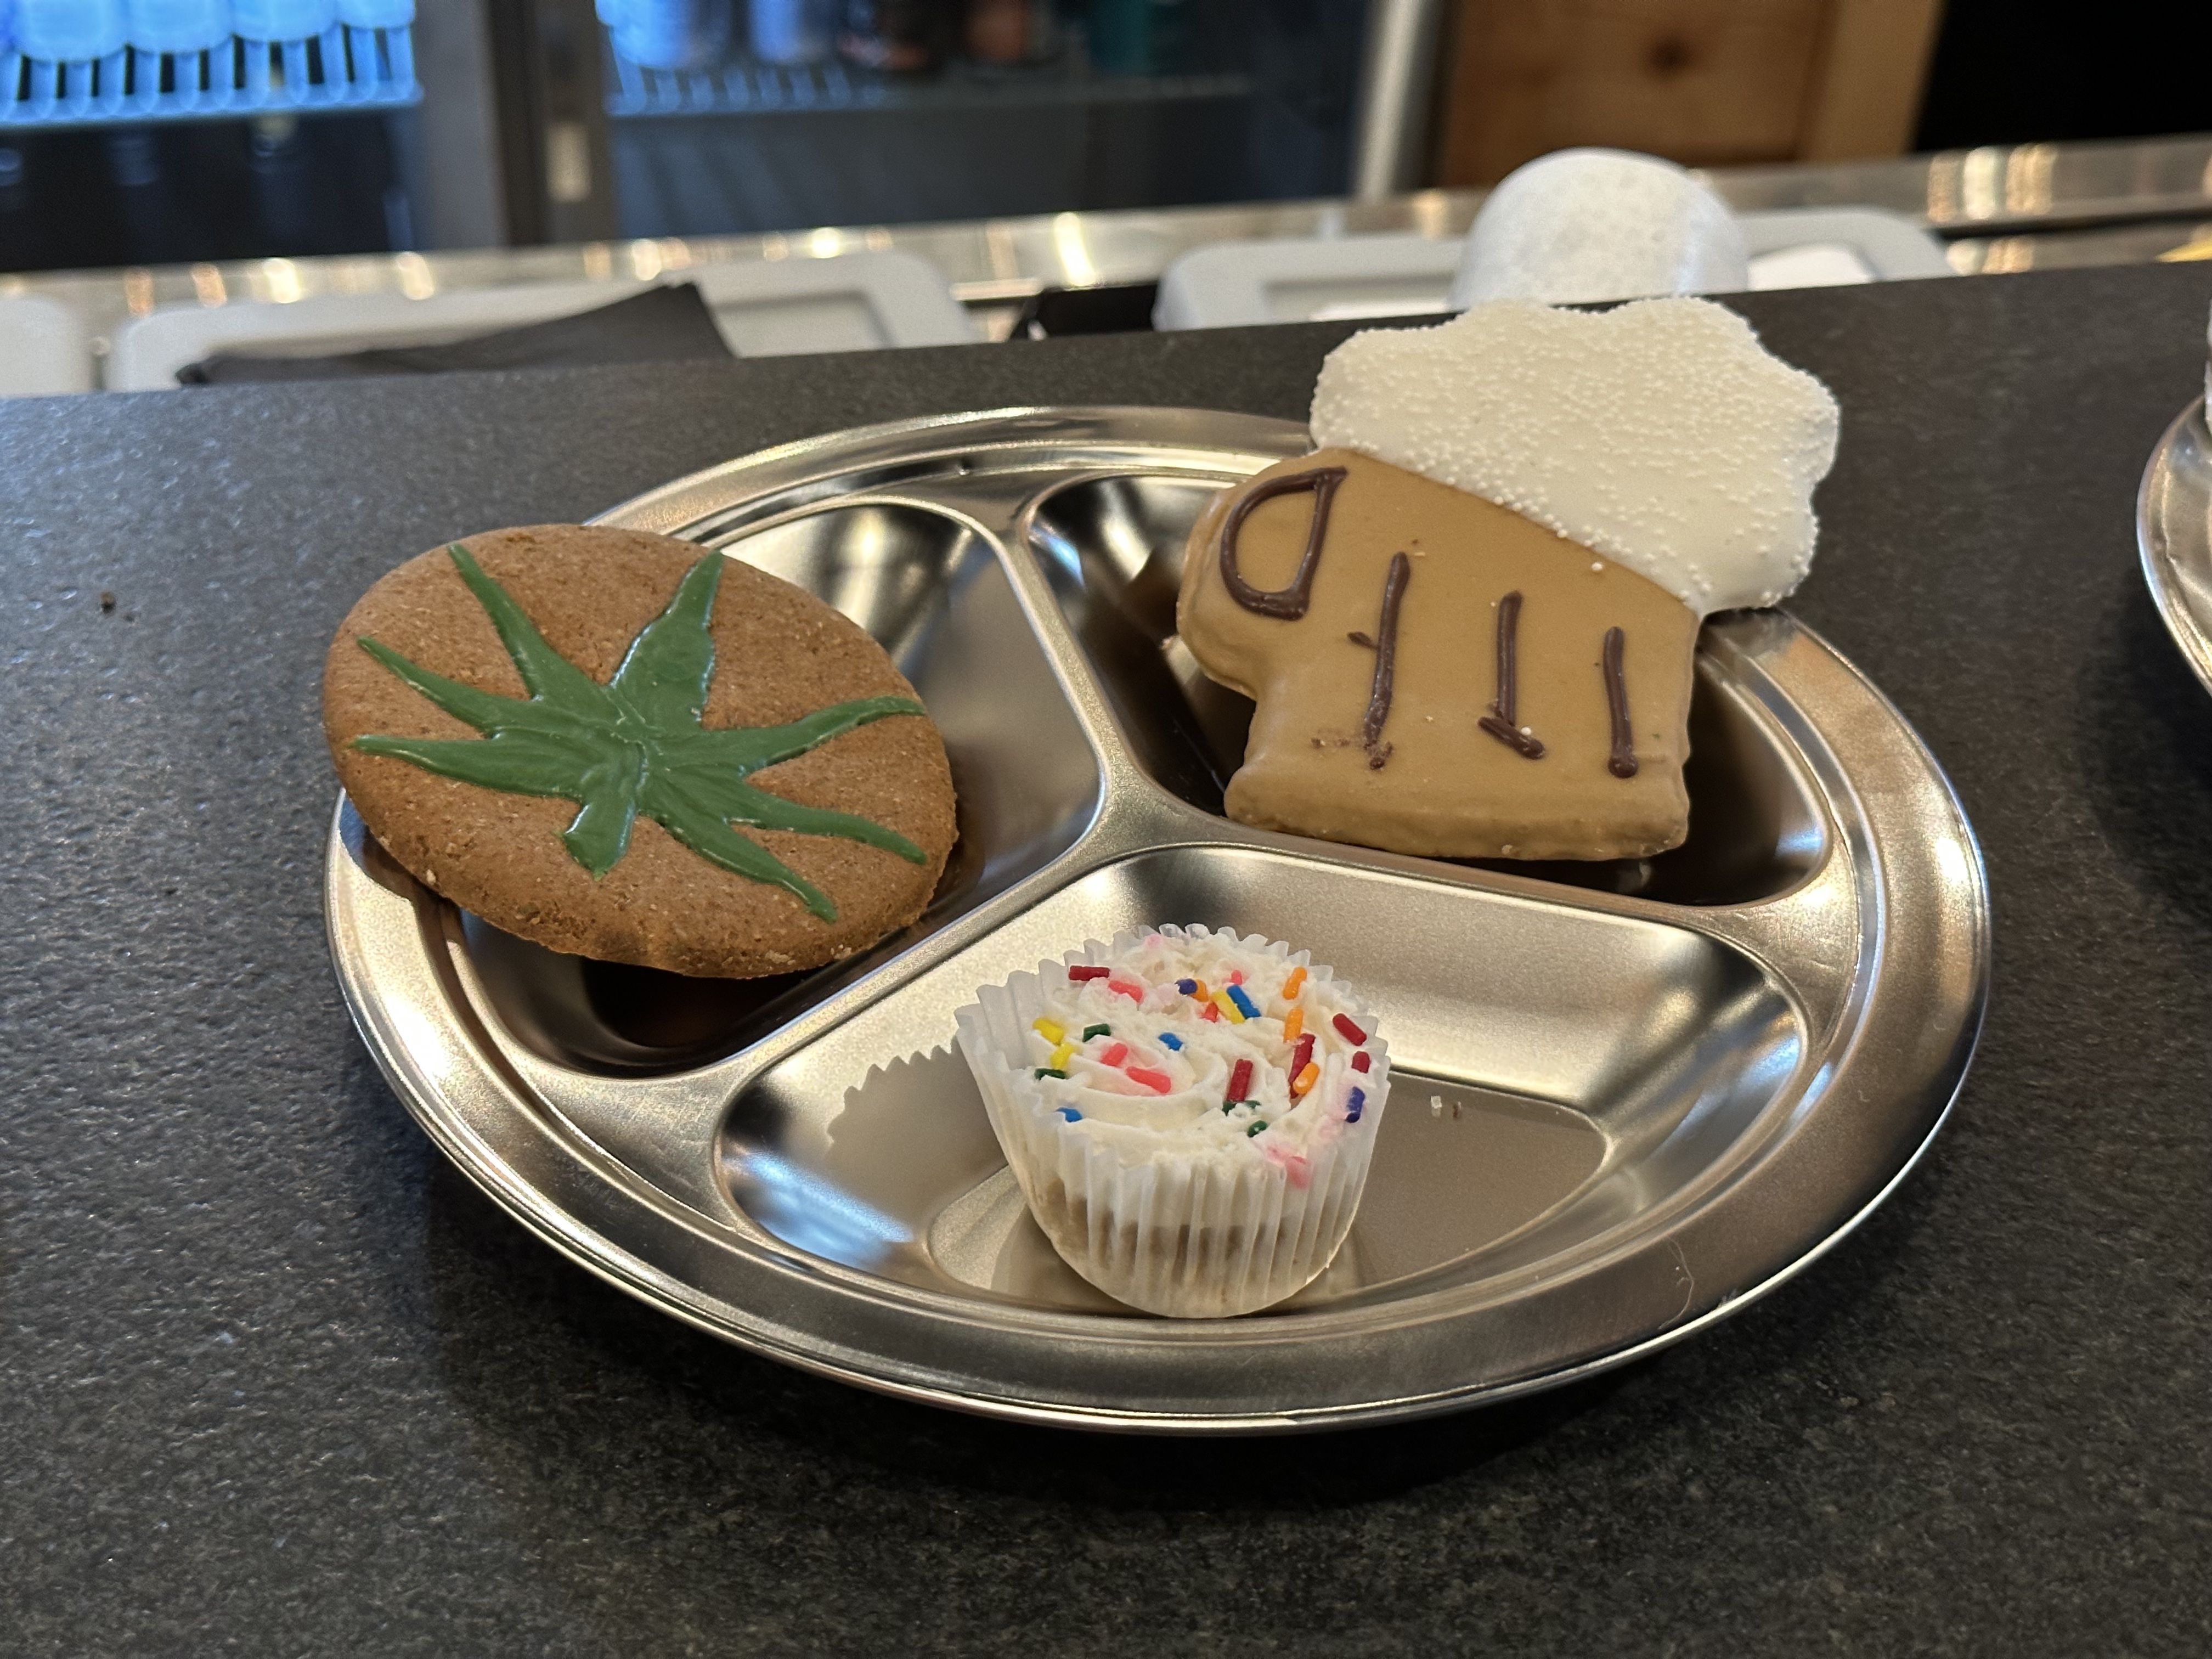 A metallic plate with three dog treats: One shaped and designed like an overflowing pint of beer, one with a green marijuana flower and one that's a white cupcake with rainbow sprinkles.